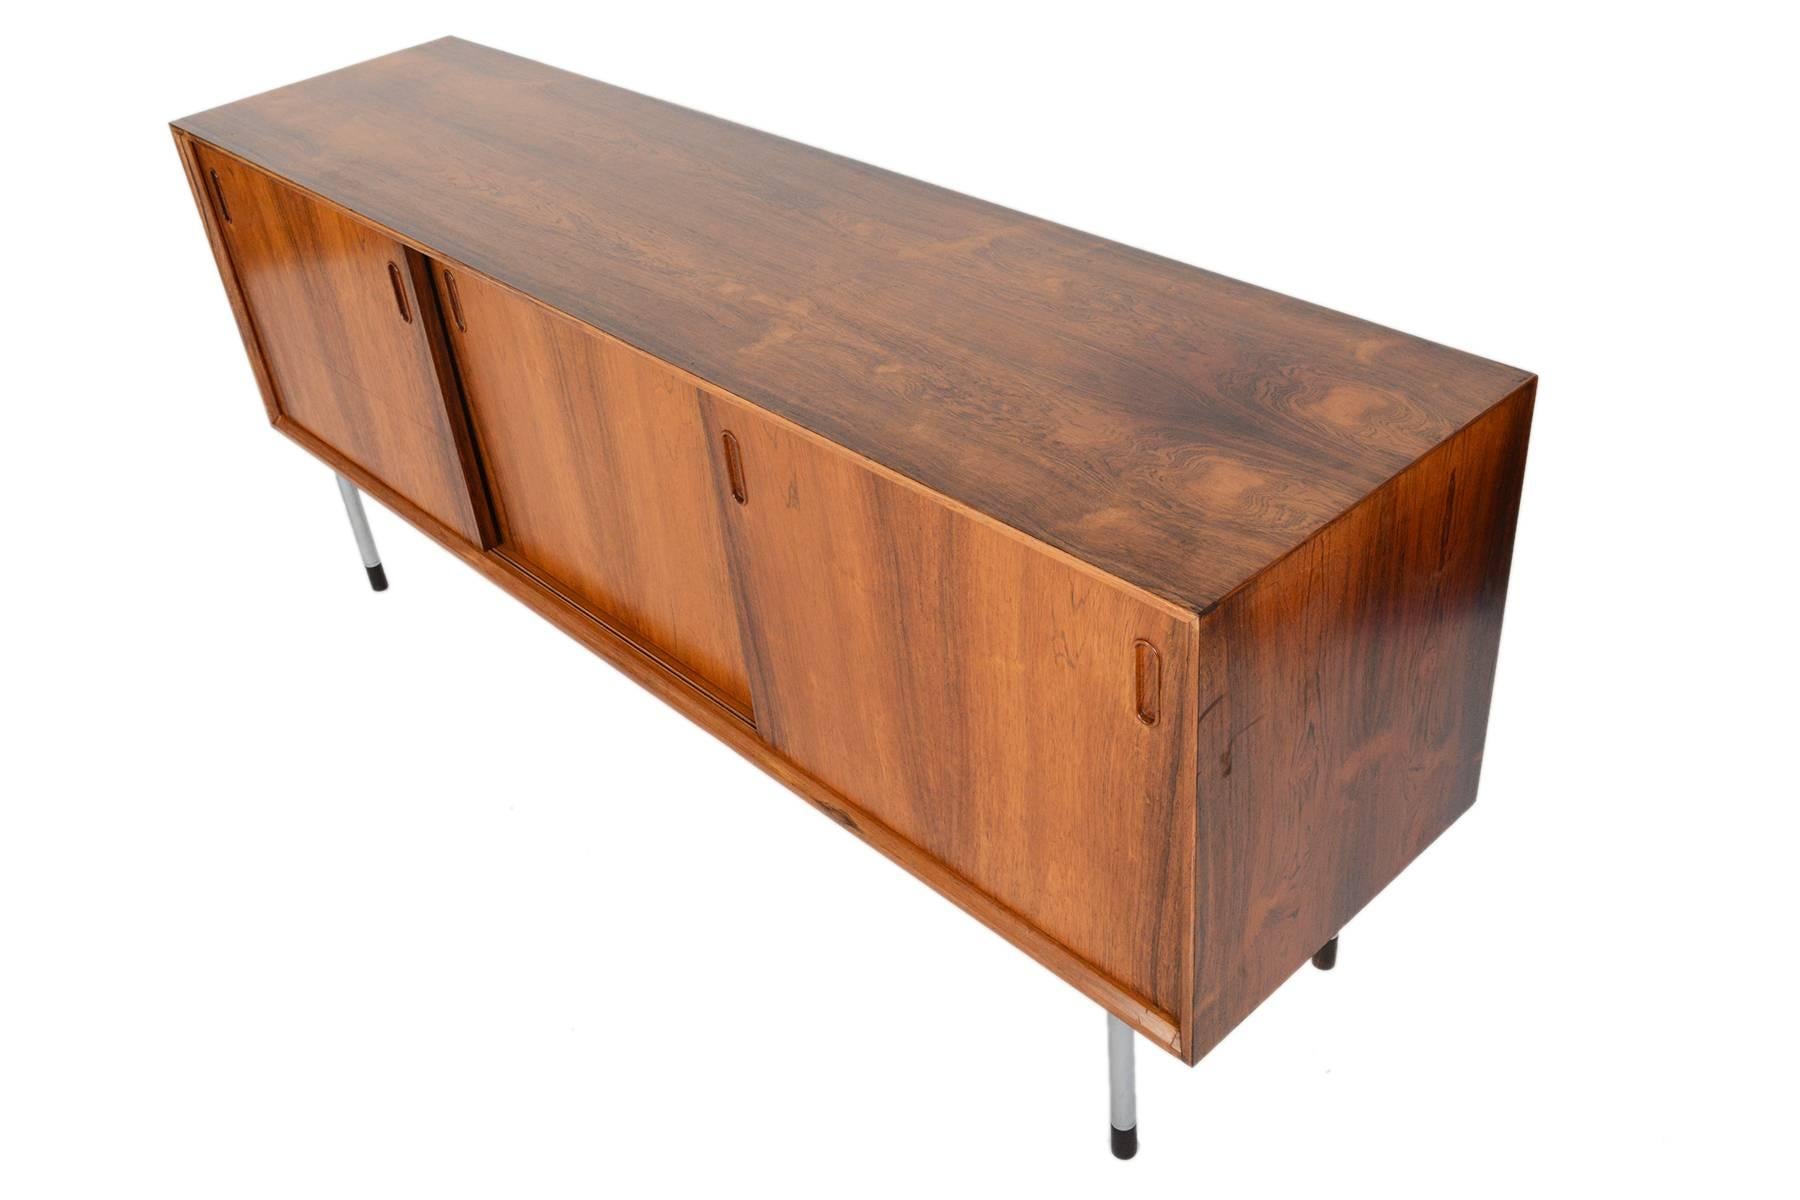 This Danish modern credenza hails from the 1960s and is perfectly sized for modern living. Crafted in Brazilian rosewood with handsomely refined lines, the three sliding doors open to reveal three bays with adjustable shelving and seven drawers in